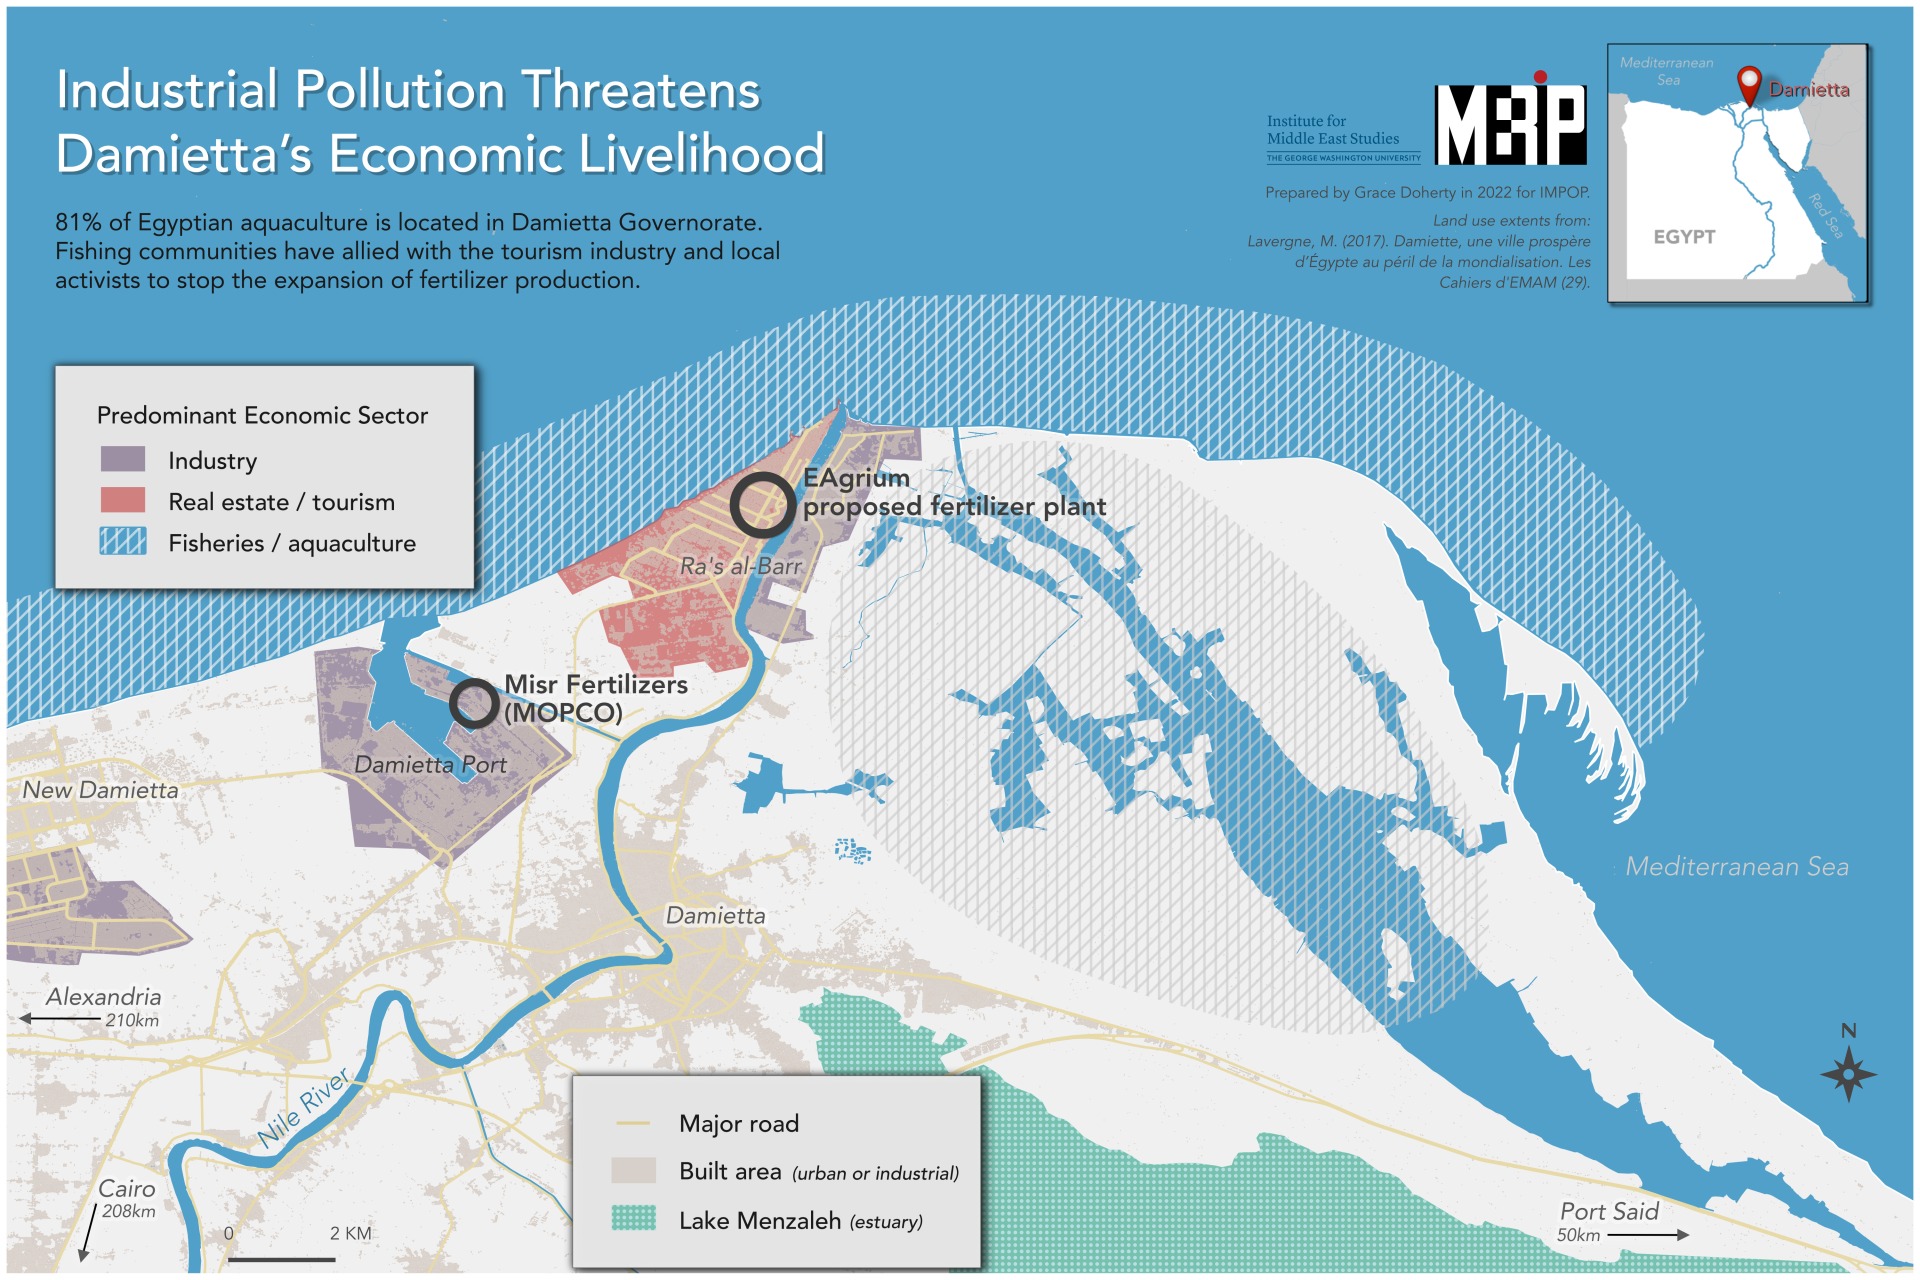 Maping showing the proximity of the fertilizer plant to tourism and aquaculture industries